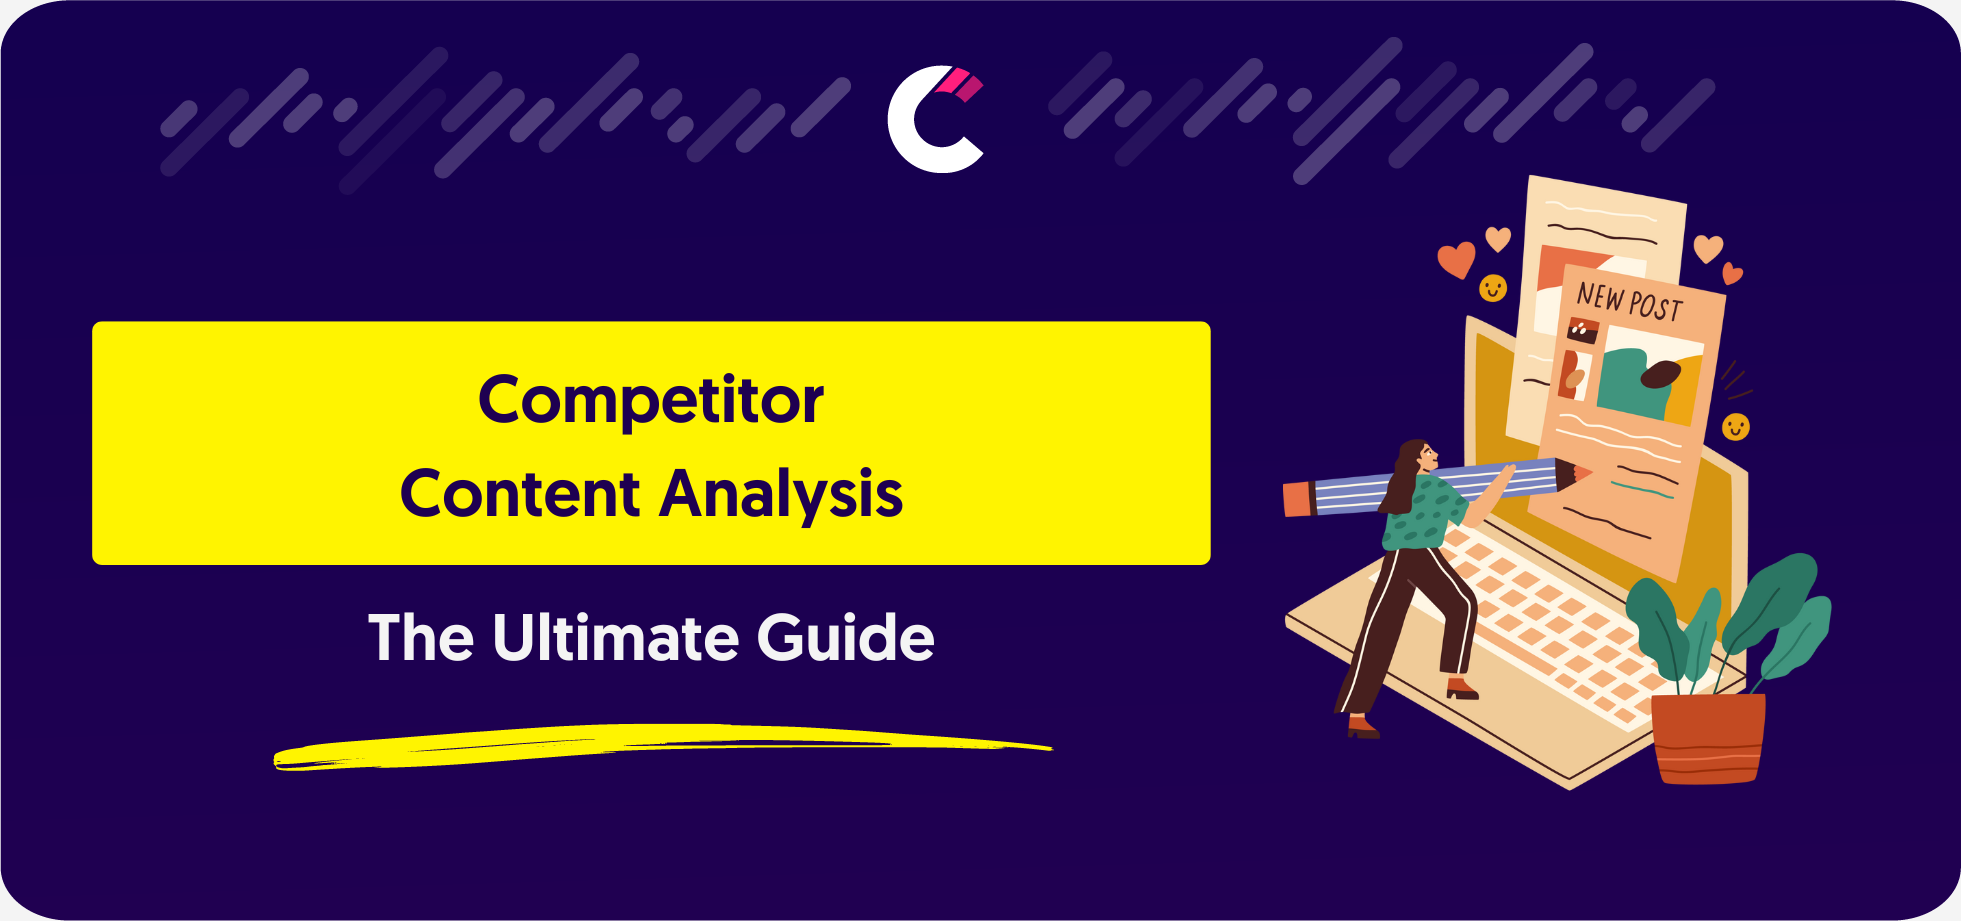 Competitor Content Analysis The Ultimate Guide